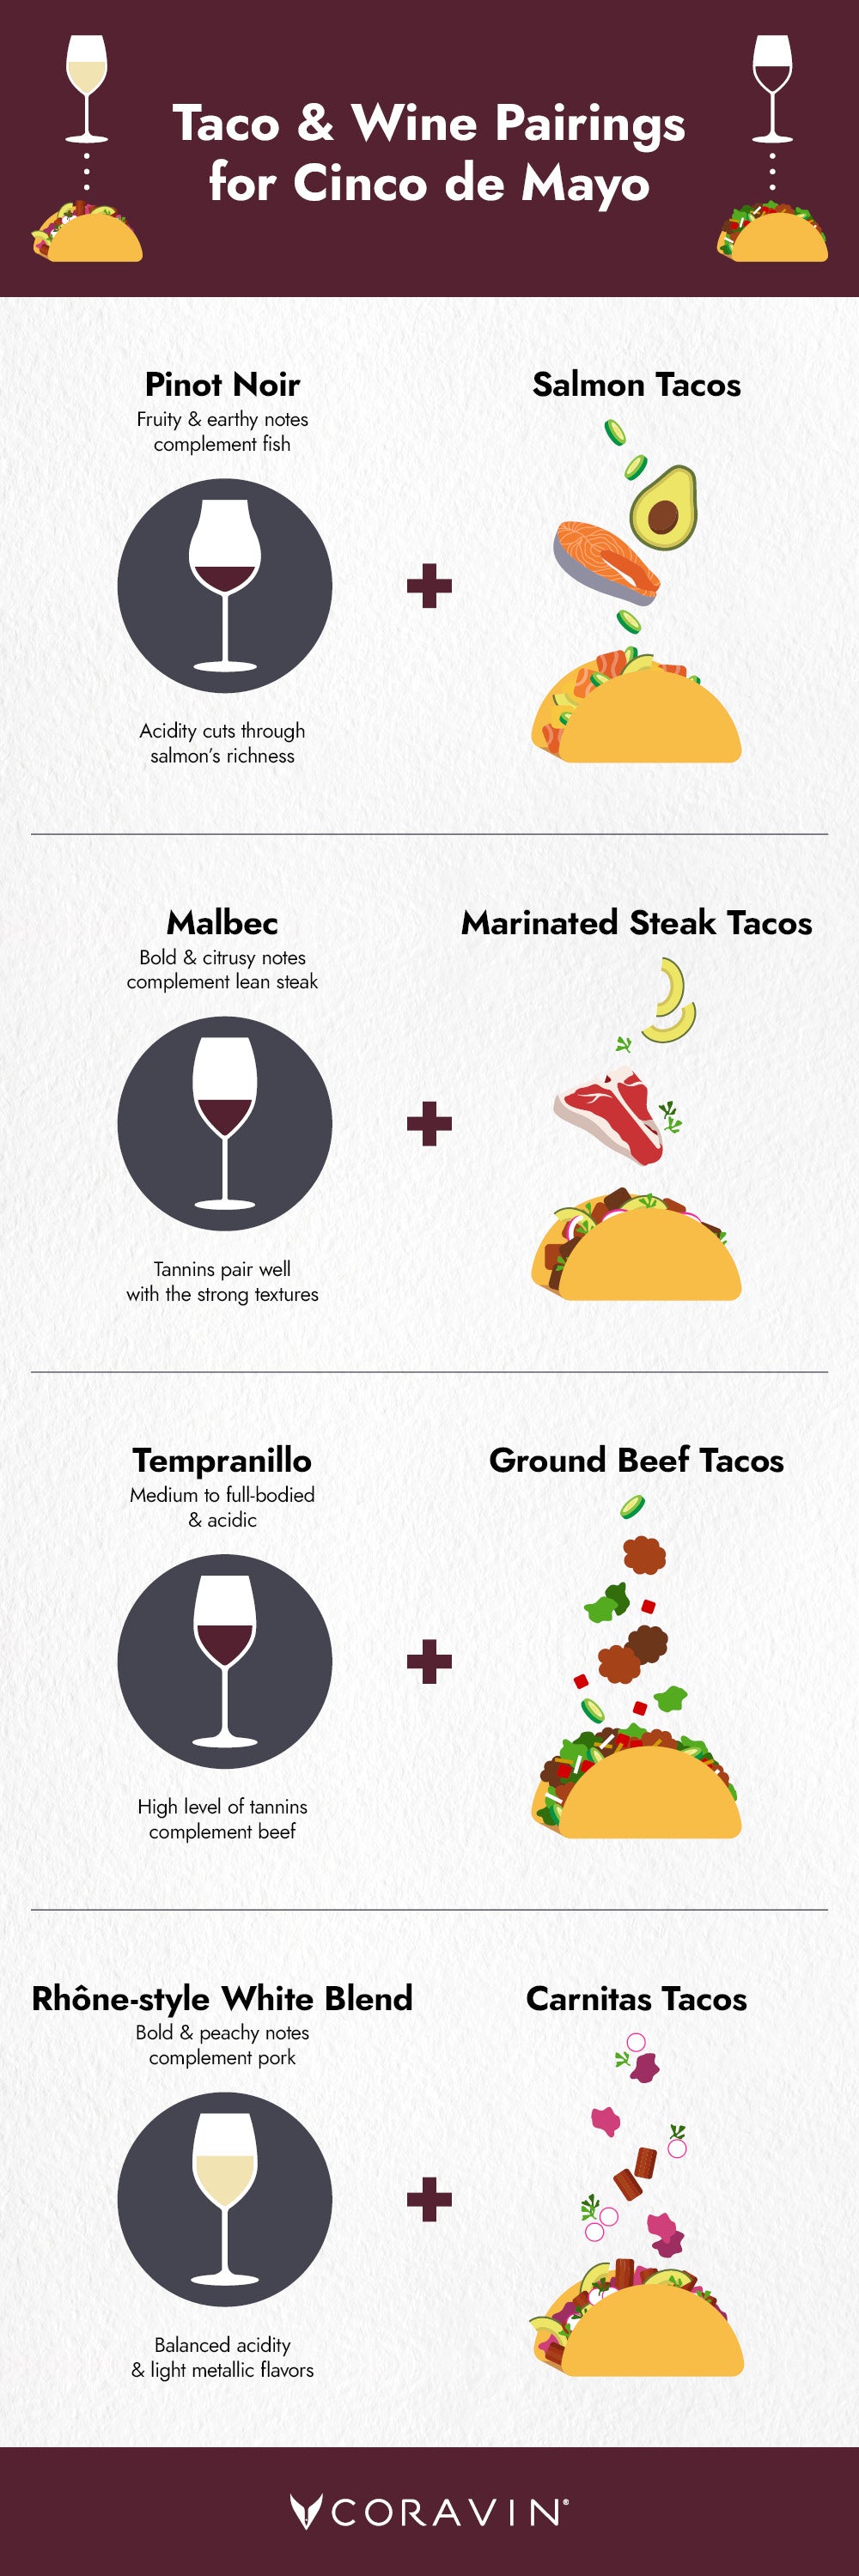 taco infographic with wine pairings